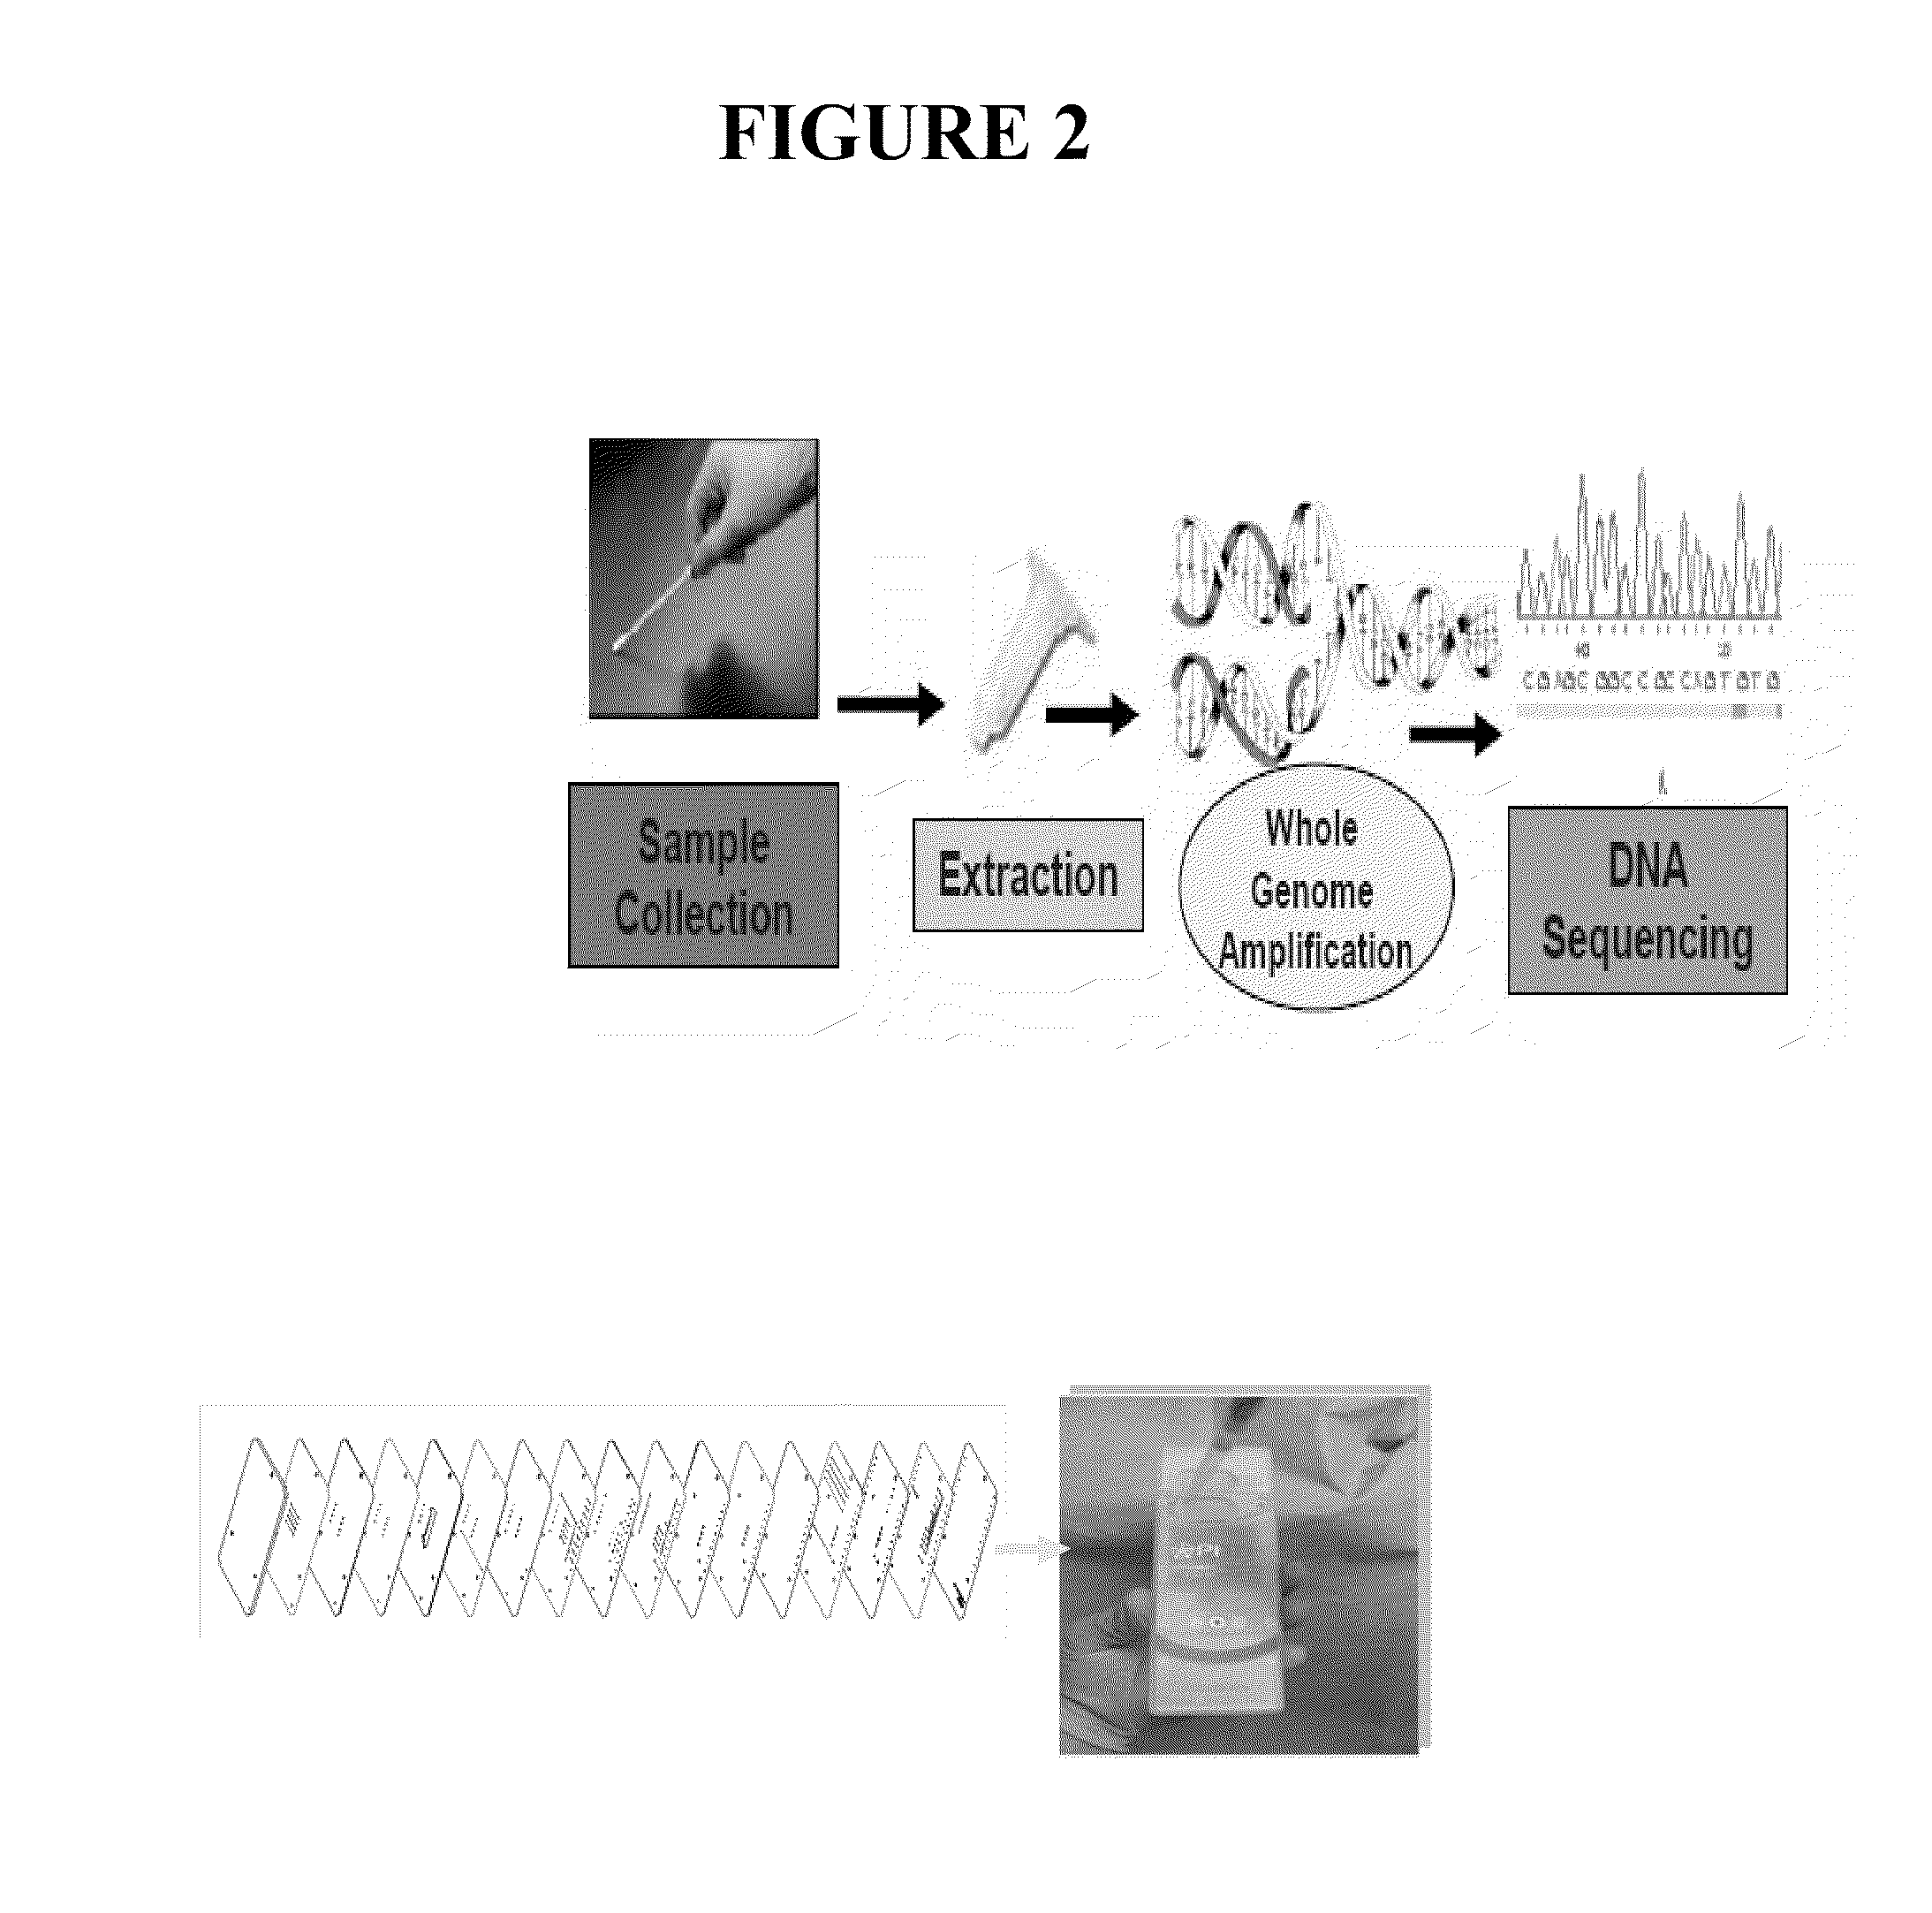 Integrated sample preparation systems and stabilized enzyme mixtures